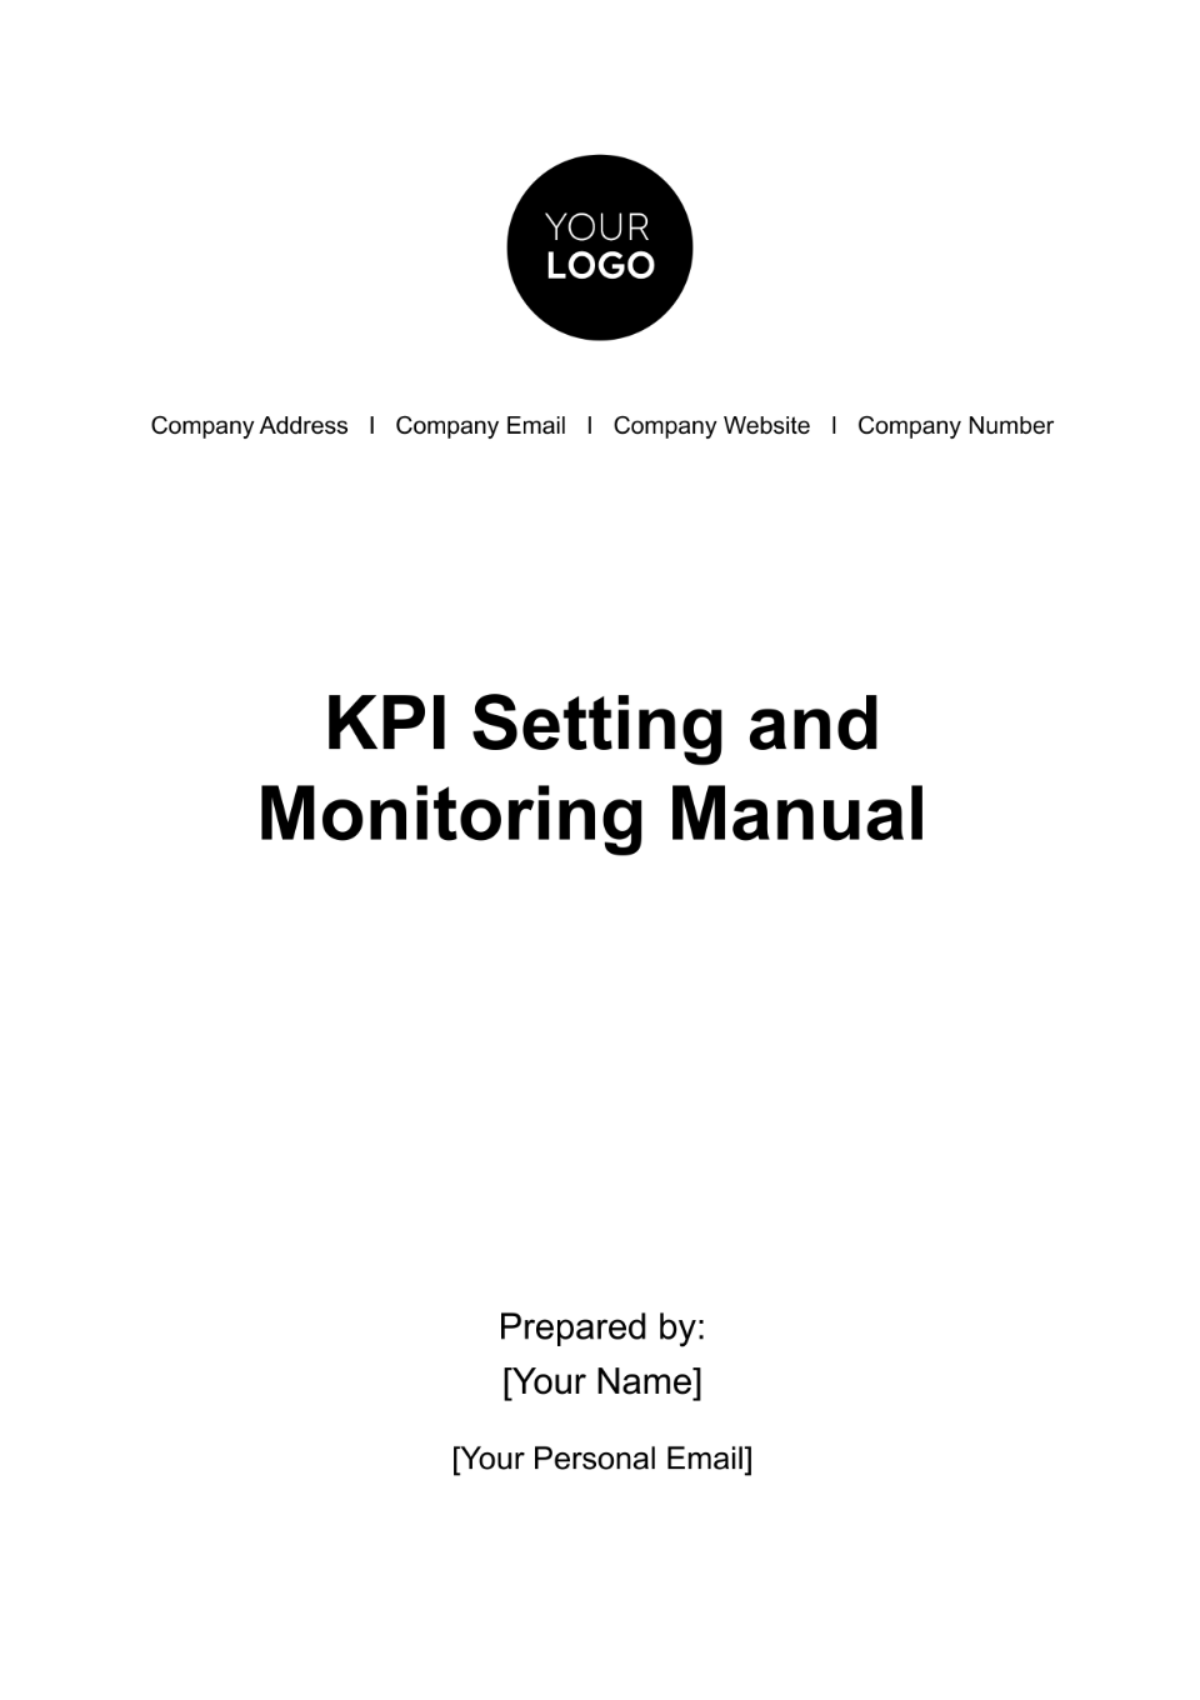 Free KPI Setting and Monitoring Manual HR Template